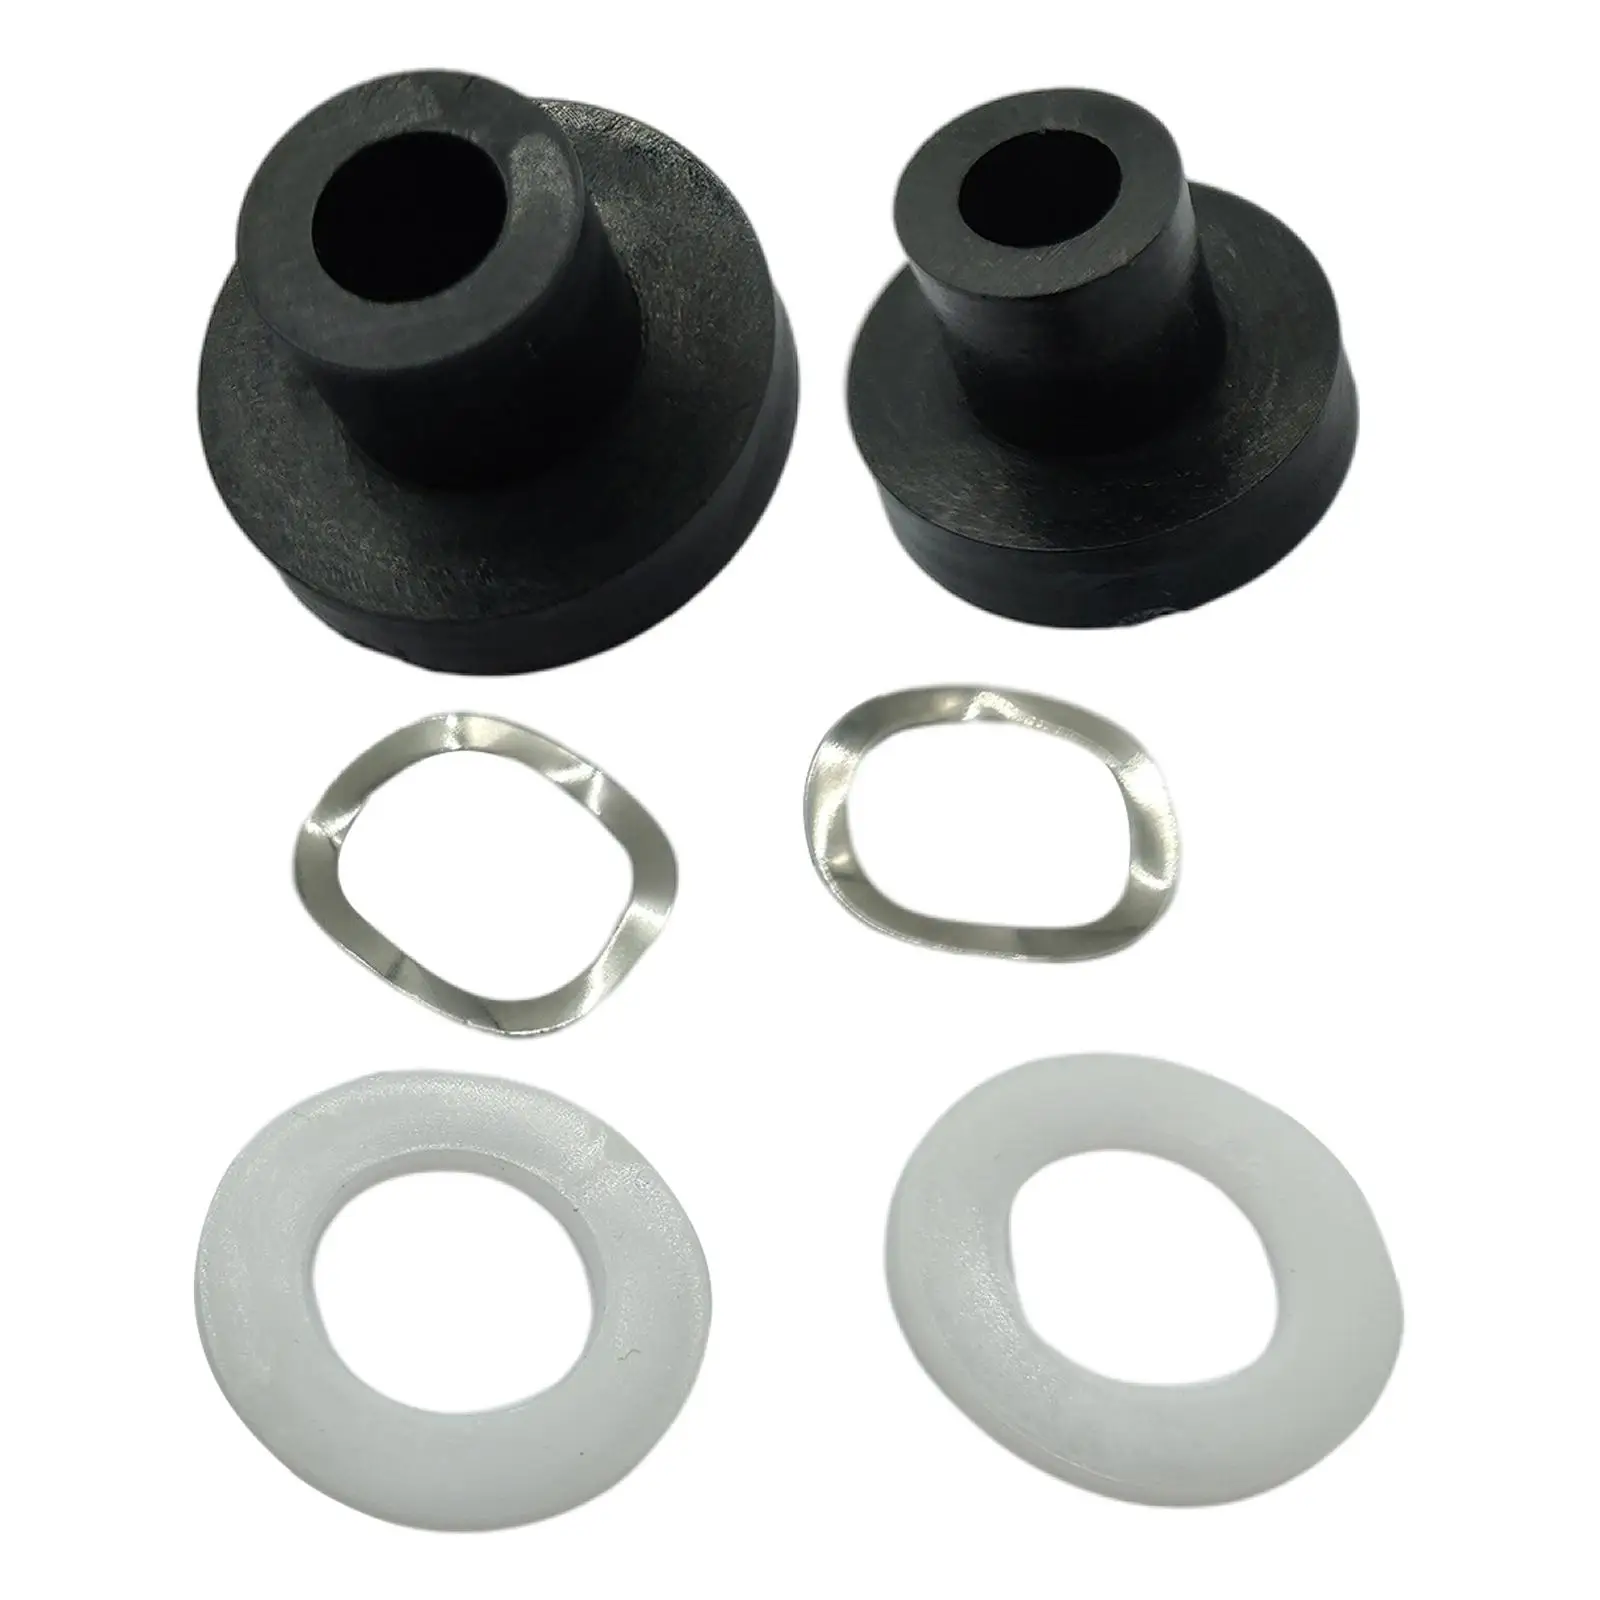 2x Car Window Bushings 909 Replacement Spare Parts Premium Professional Accessories High Performance Fit for 990